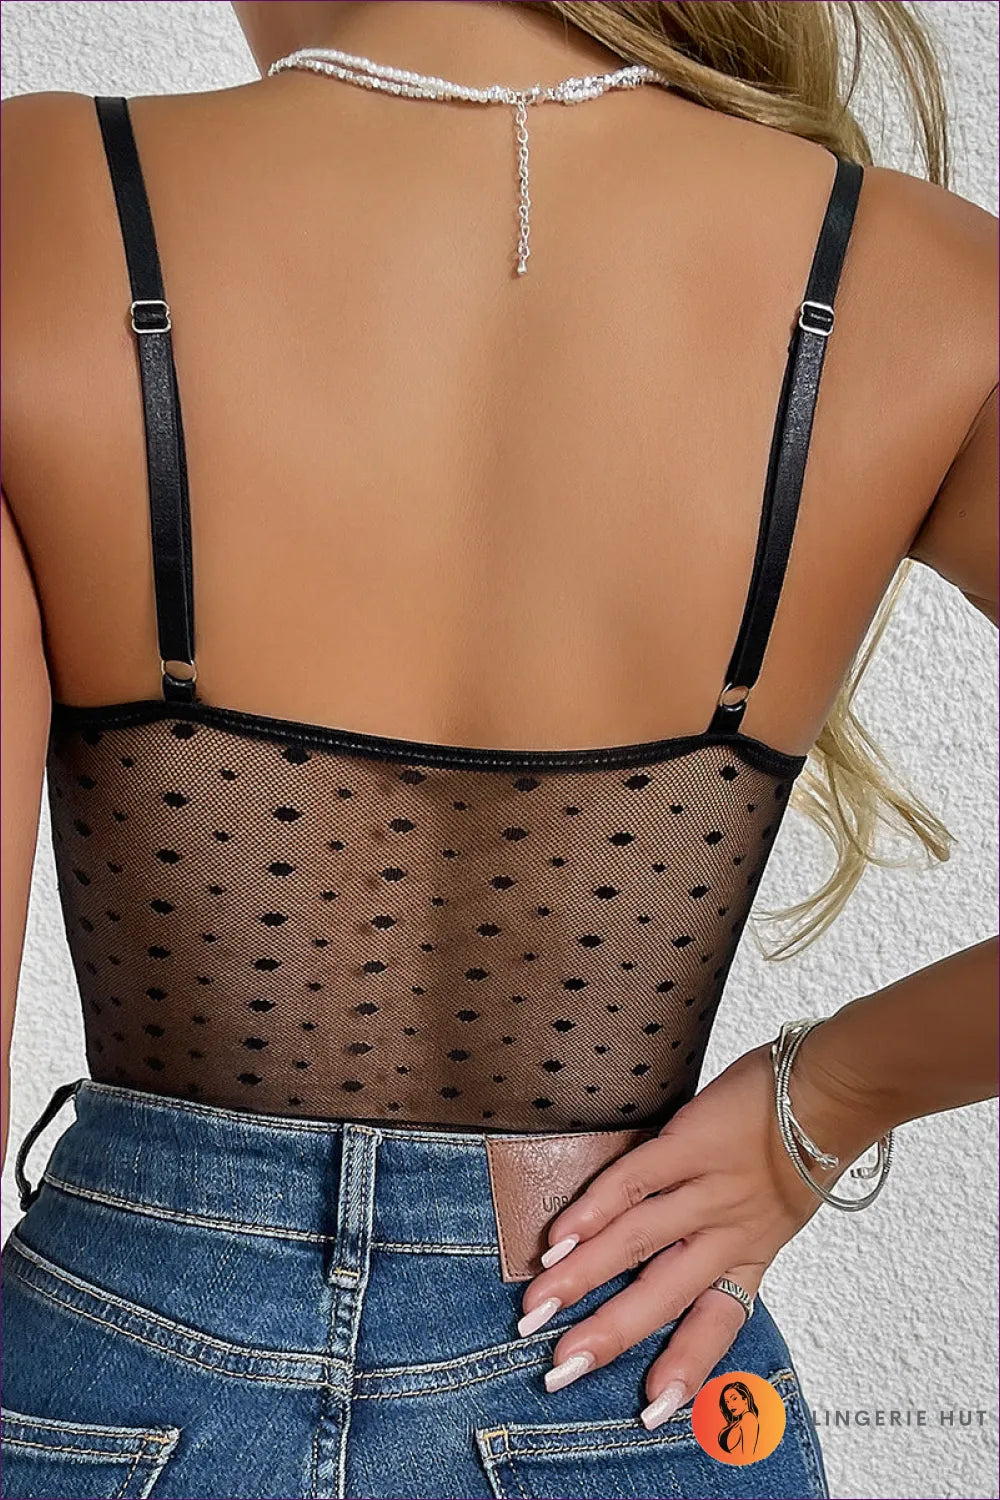 Sexy Mesh Polka Dot Backless Bodysuit – Summer Seduction For Clubwear, Date Night, Everyday, Lingerie, Sheer